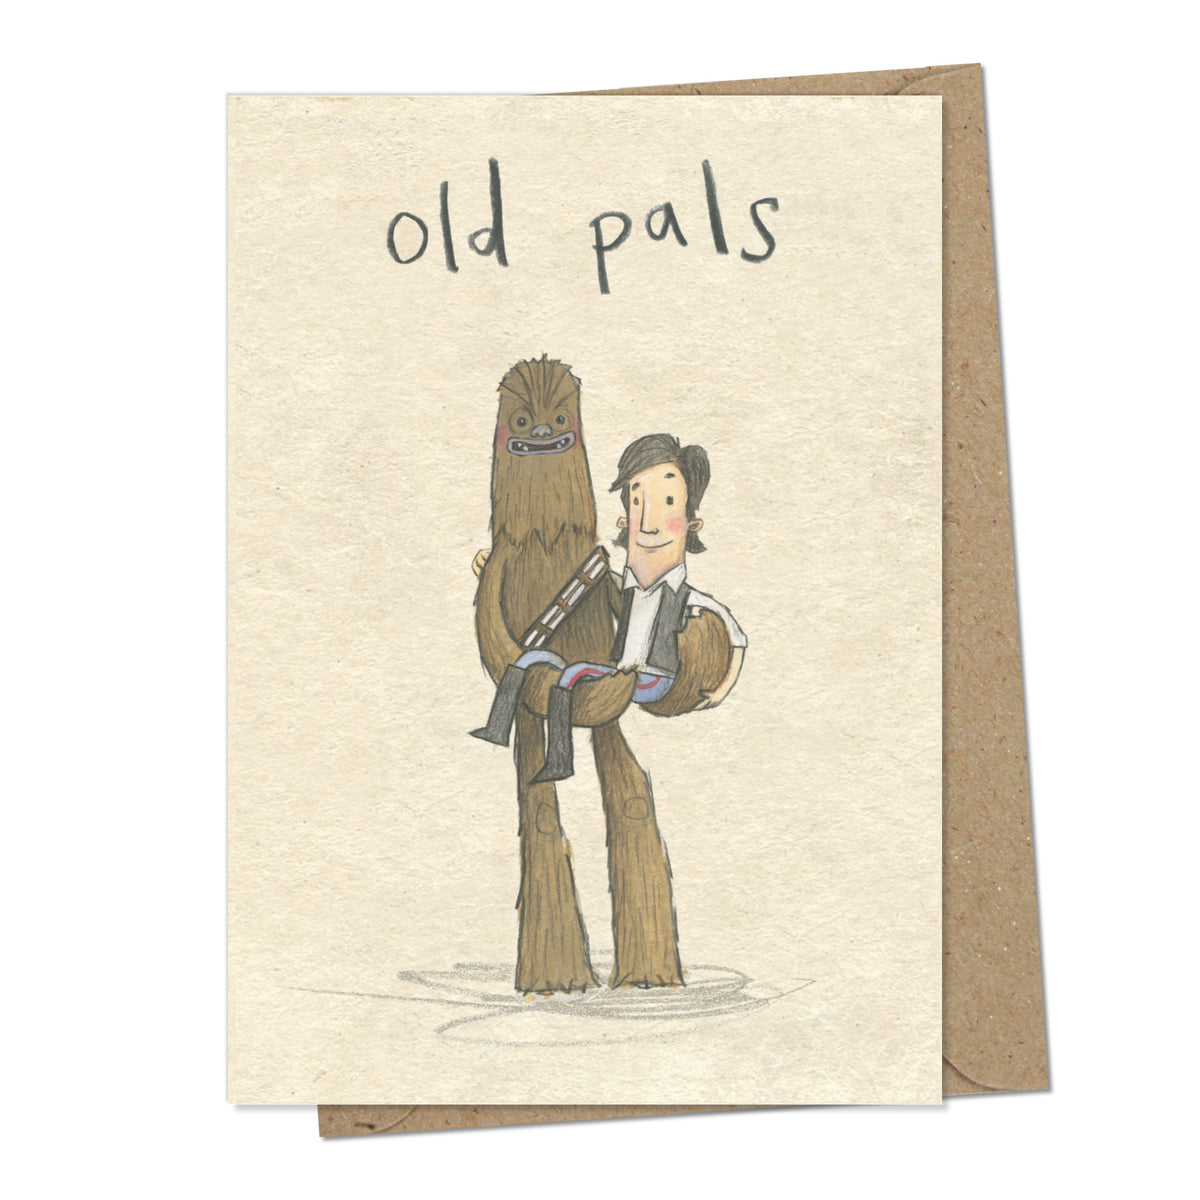 A greetings card with a mottled beige background and handwritten words above the illustration stating &#39;old pals&#39;. The illustration is of characters from the movie star wars - Chewie carrying Han Solo and them both smiling.